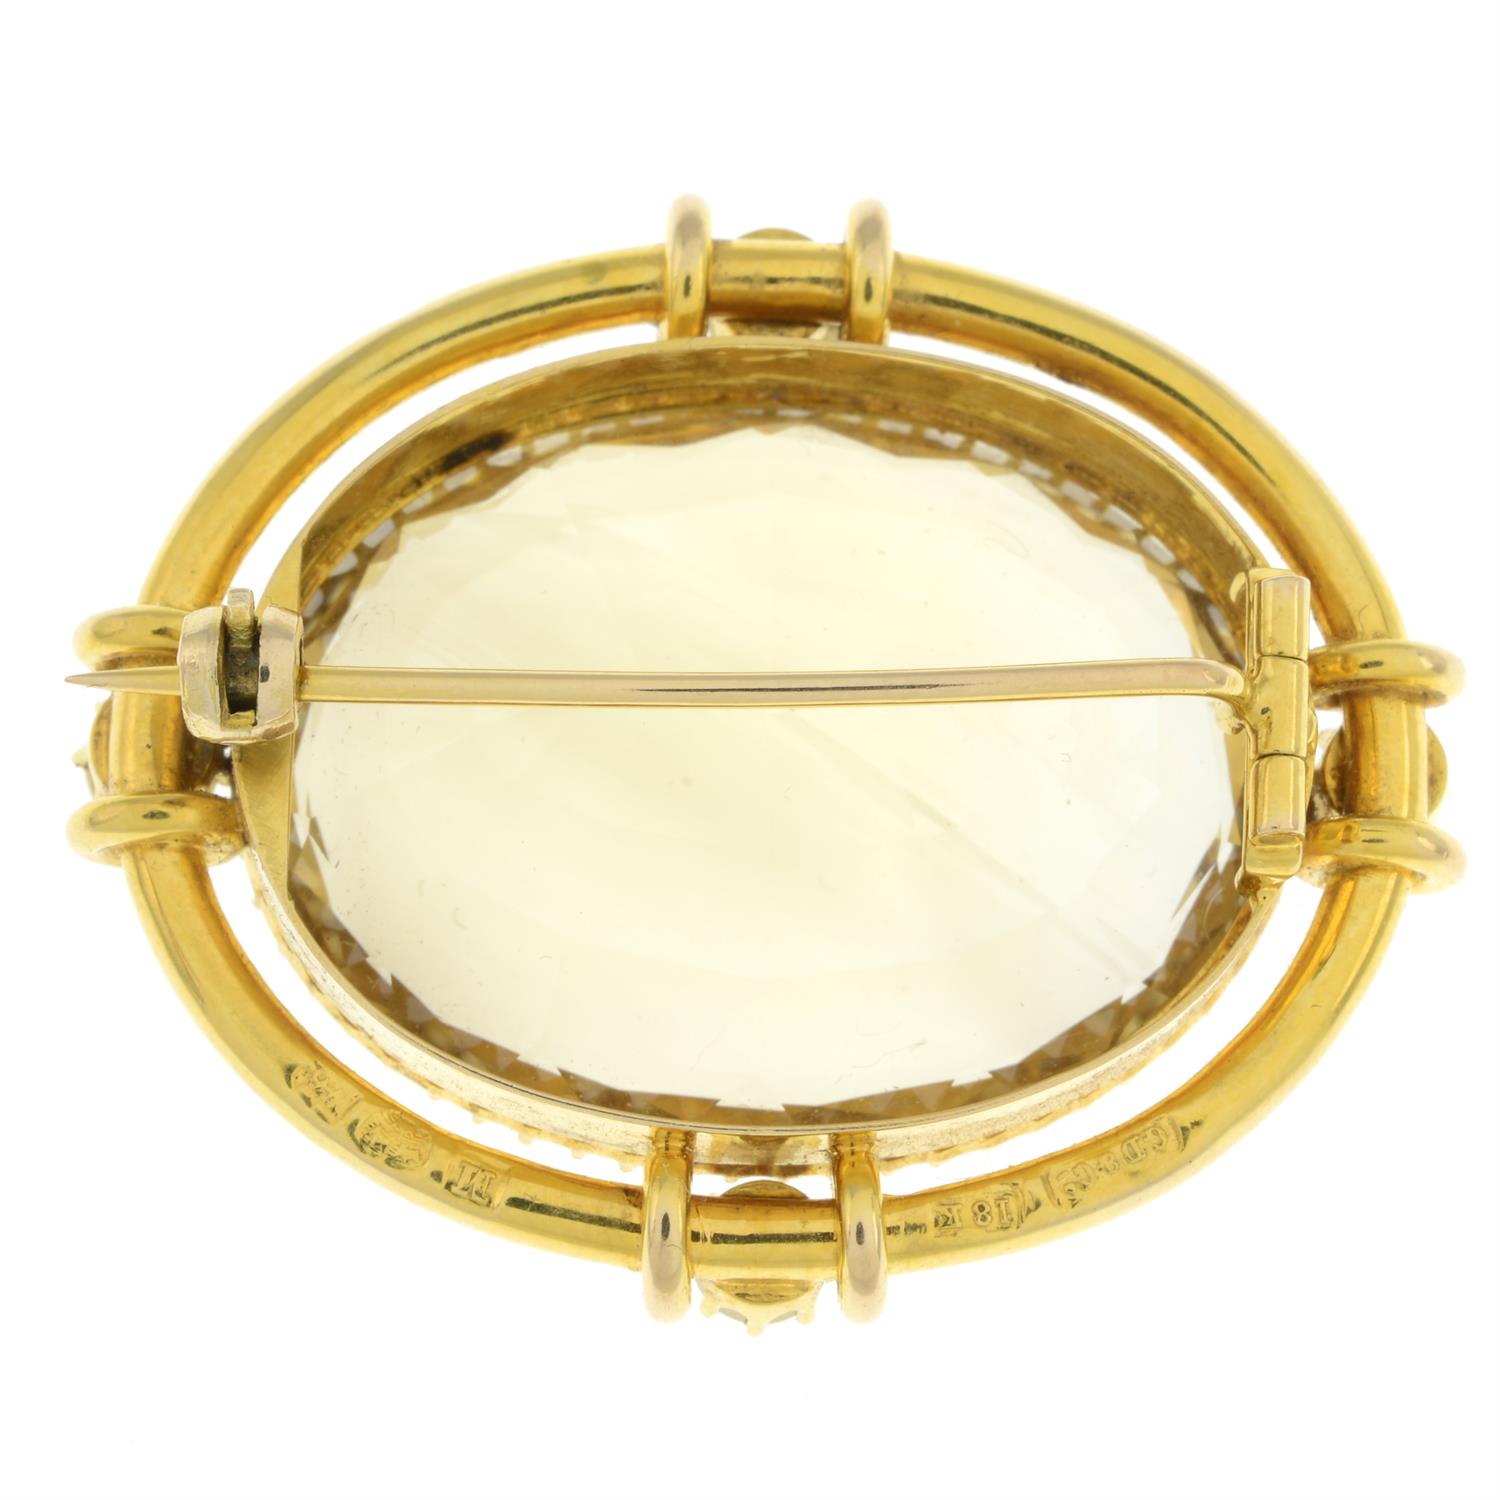 Late 19th century 18ct gold citrine and split pearl brooch - Image 3 of 4